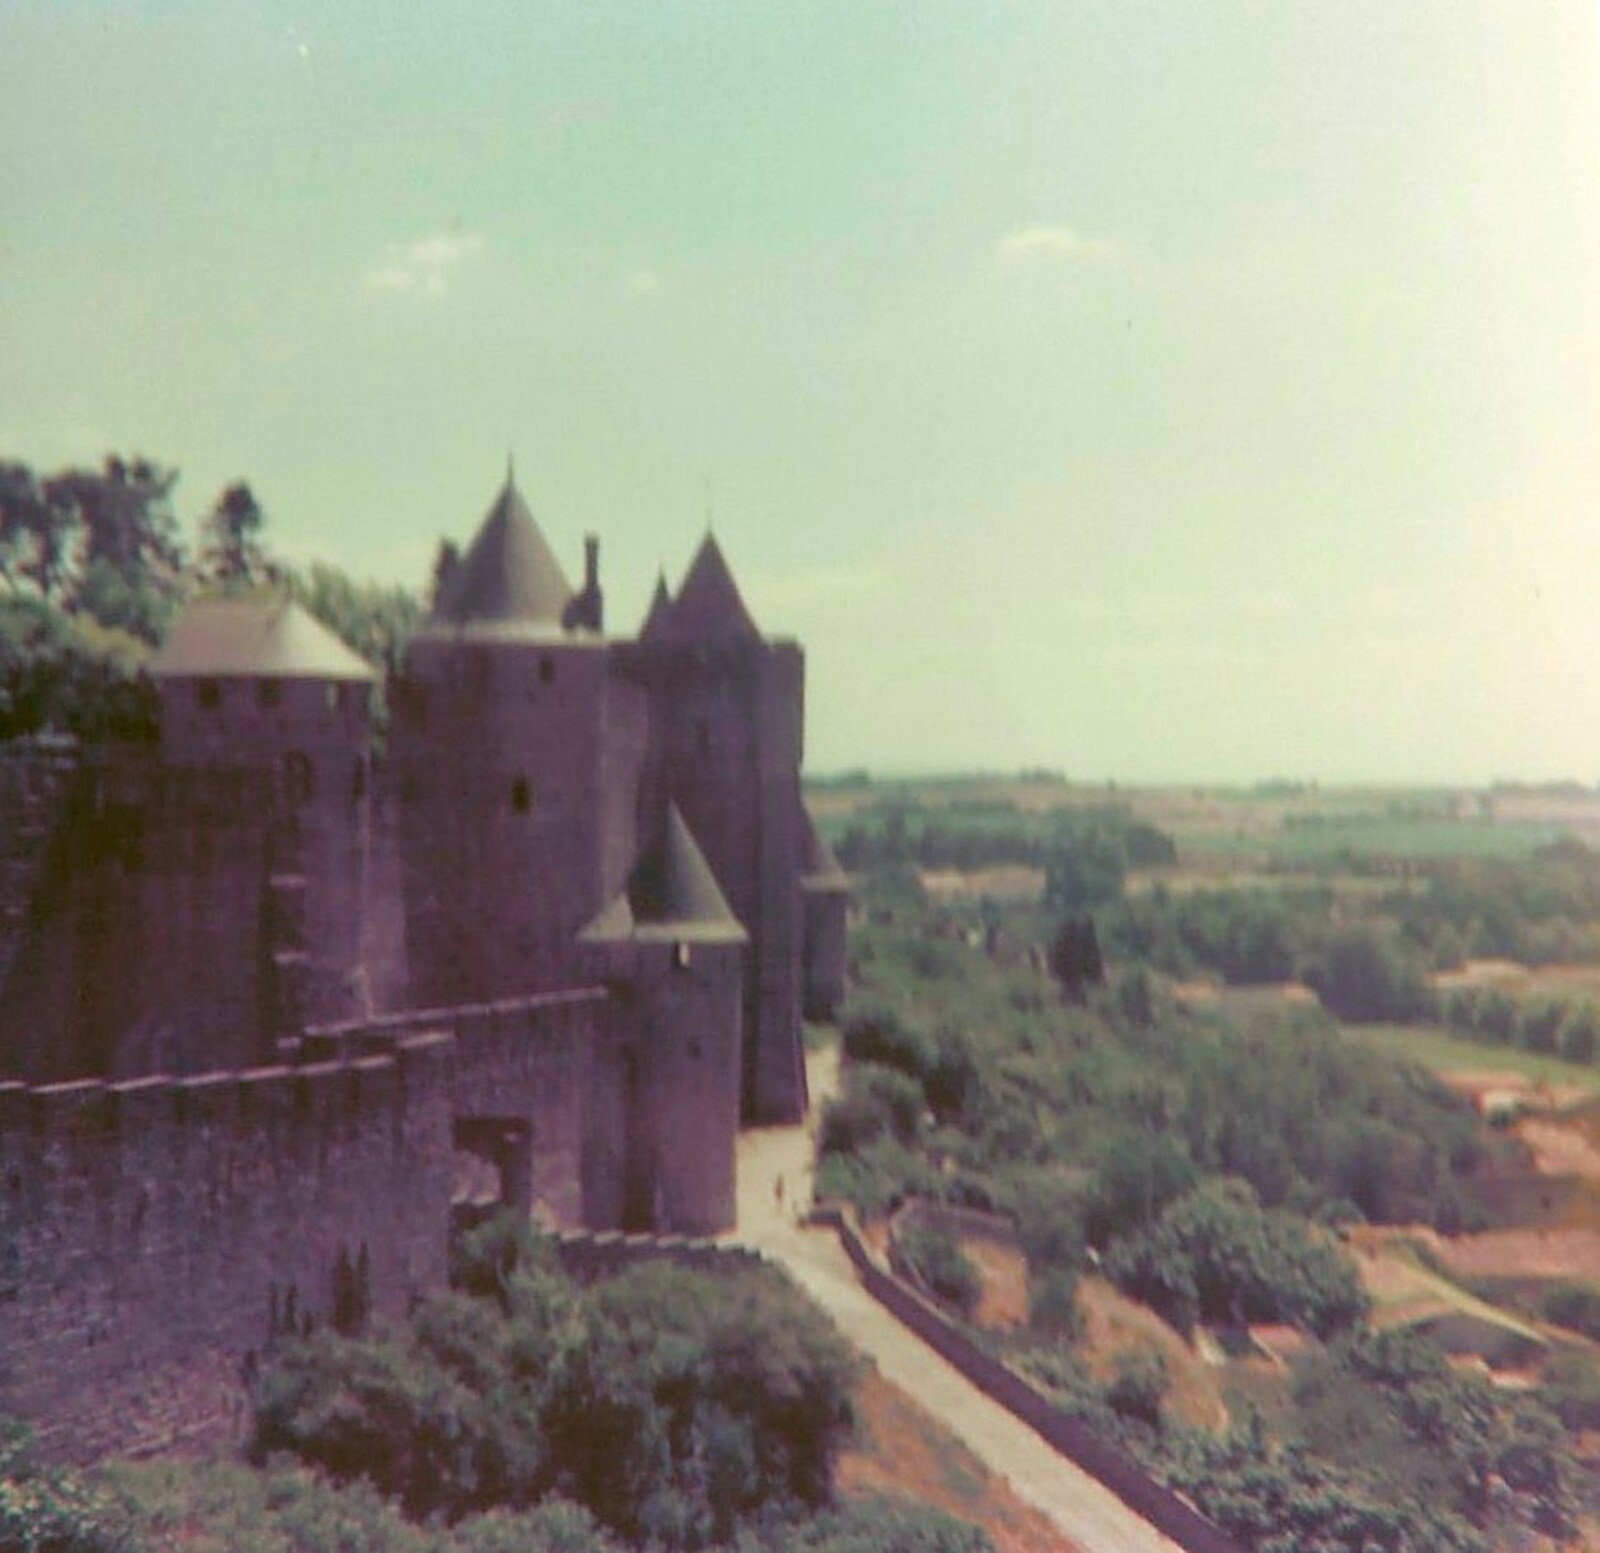 The towers of Carcassonne, and the Porte d'Aude from A Trip to Bram, Aude, France - 25th July 1980